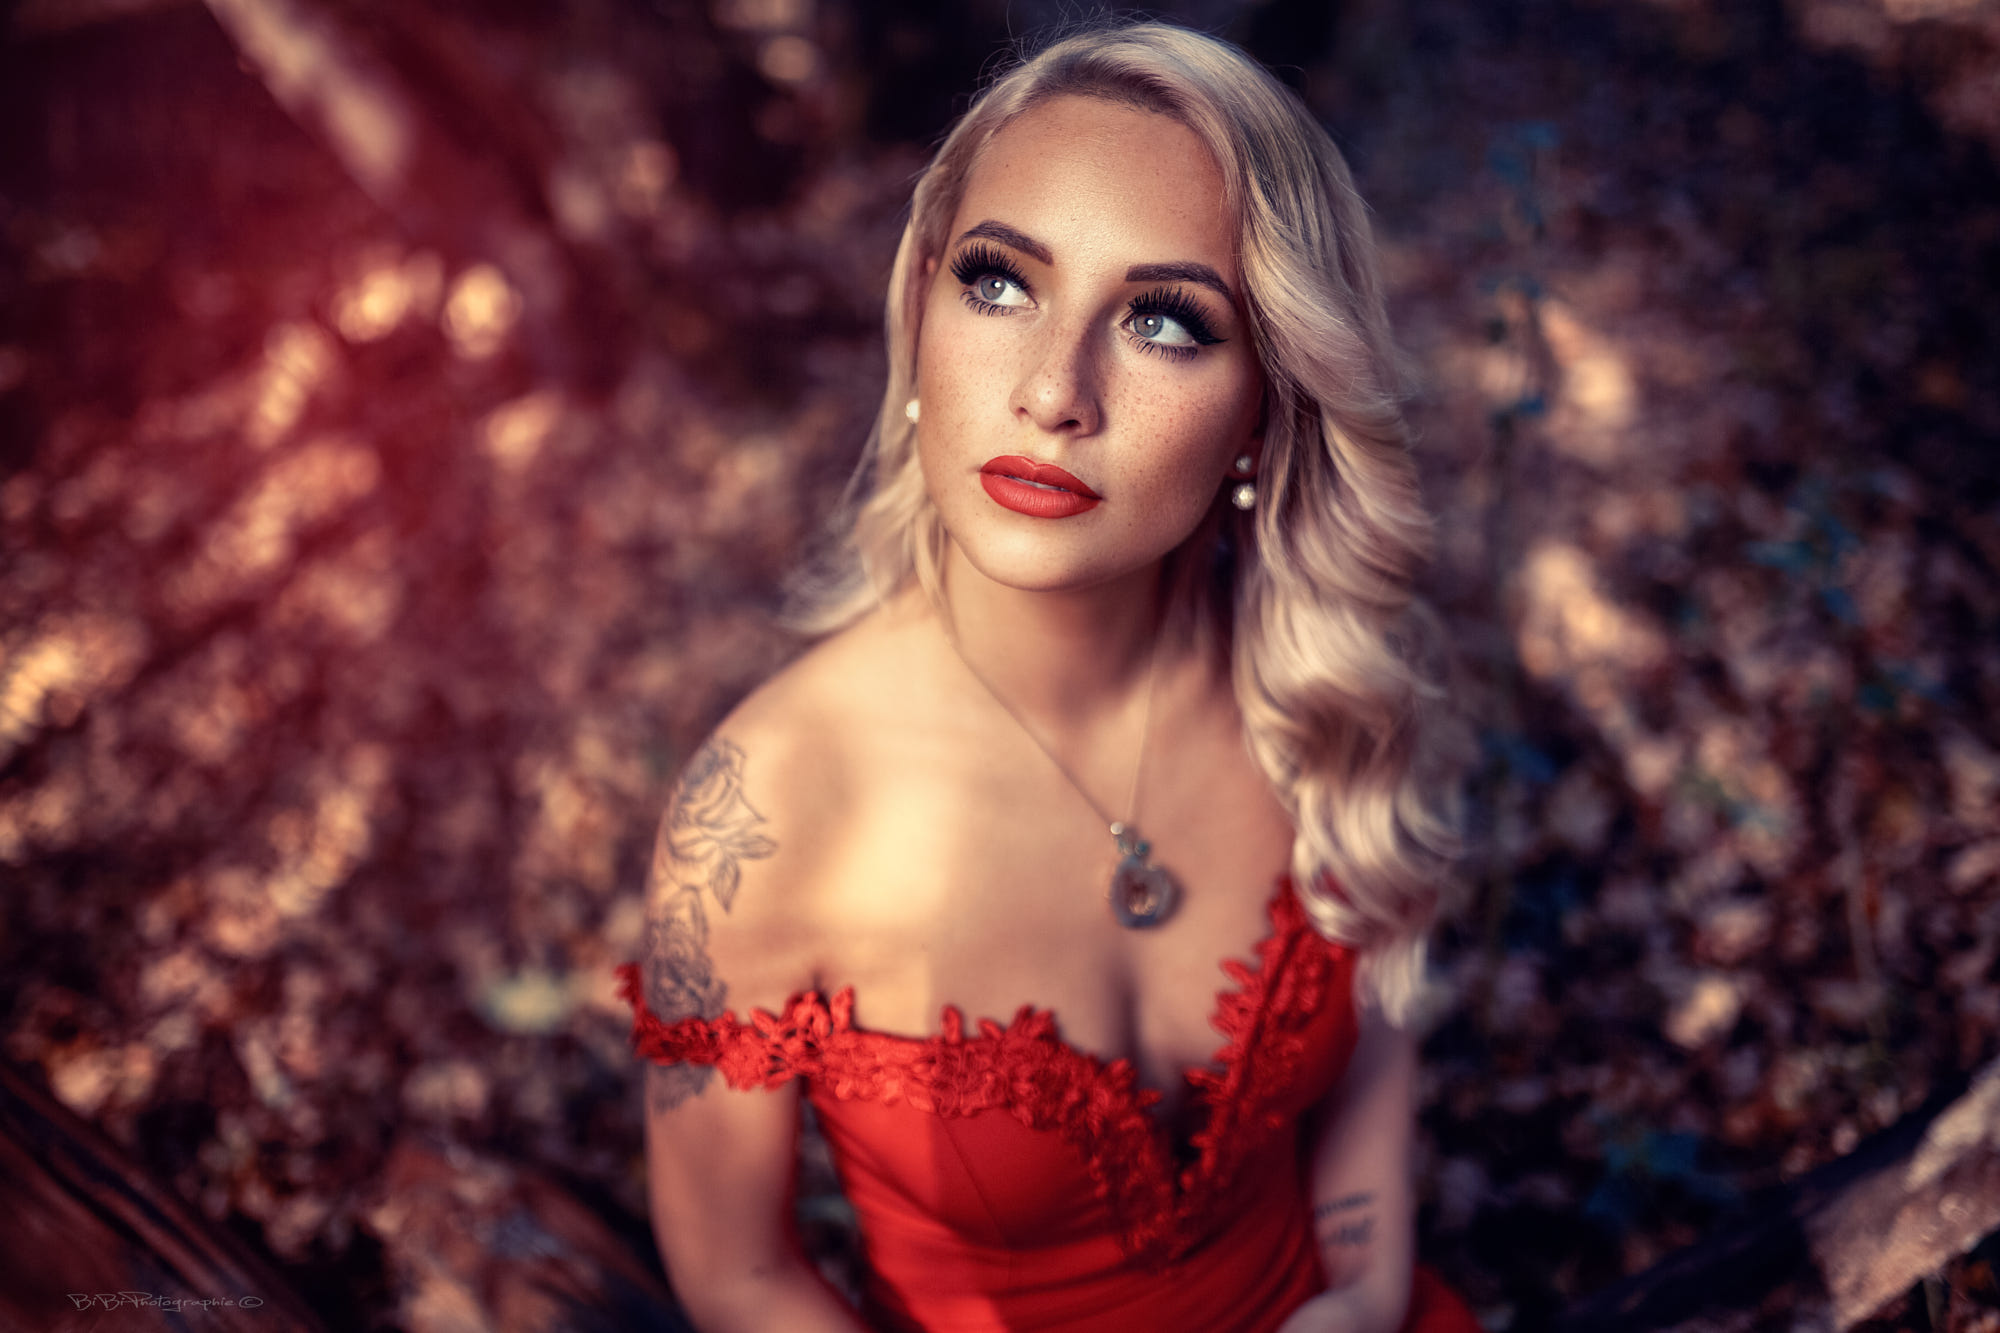 People 2000x1333 women blonde face long hair red dress women outdoors freckles red lipstick cleavage bokeh portrait no bra necklace tattoo Vincent Haetty watermarked makeup inked girls looking away dyed hair lipstick red clothing